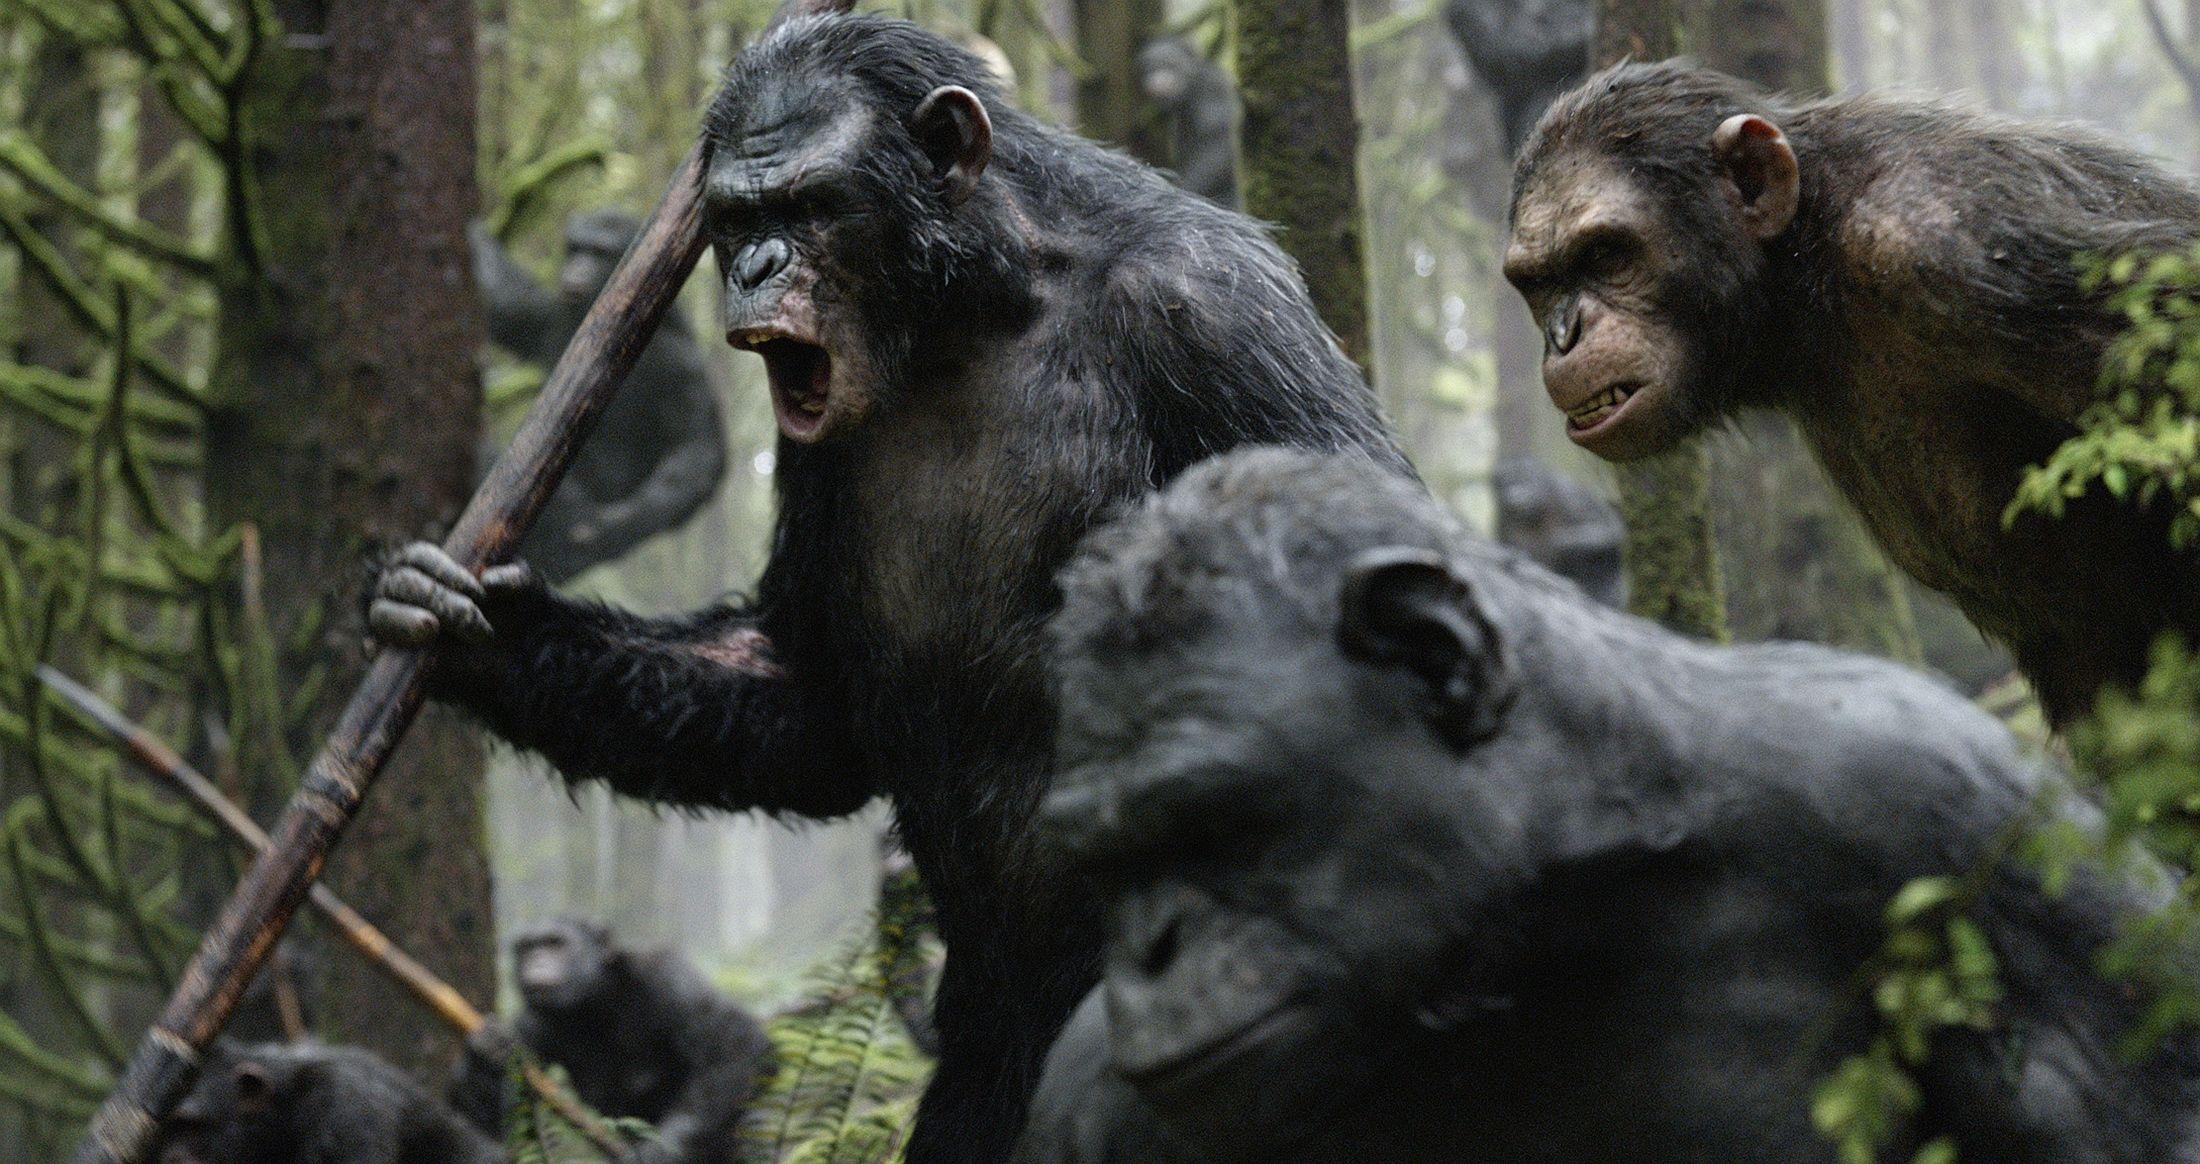 Dawn of the Planet of the Apes HD Wallpaper. Background